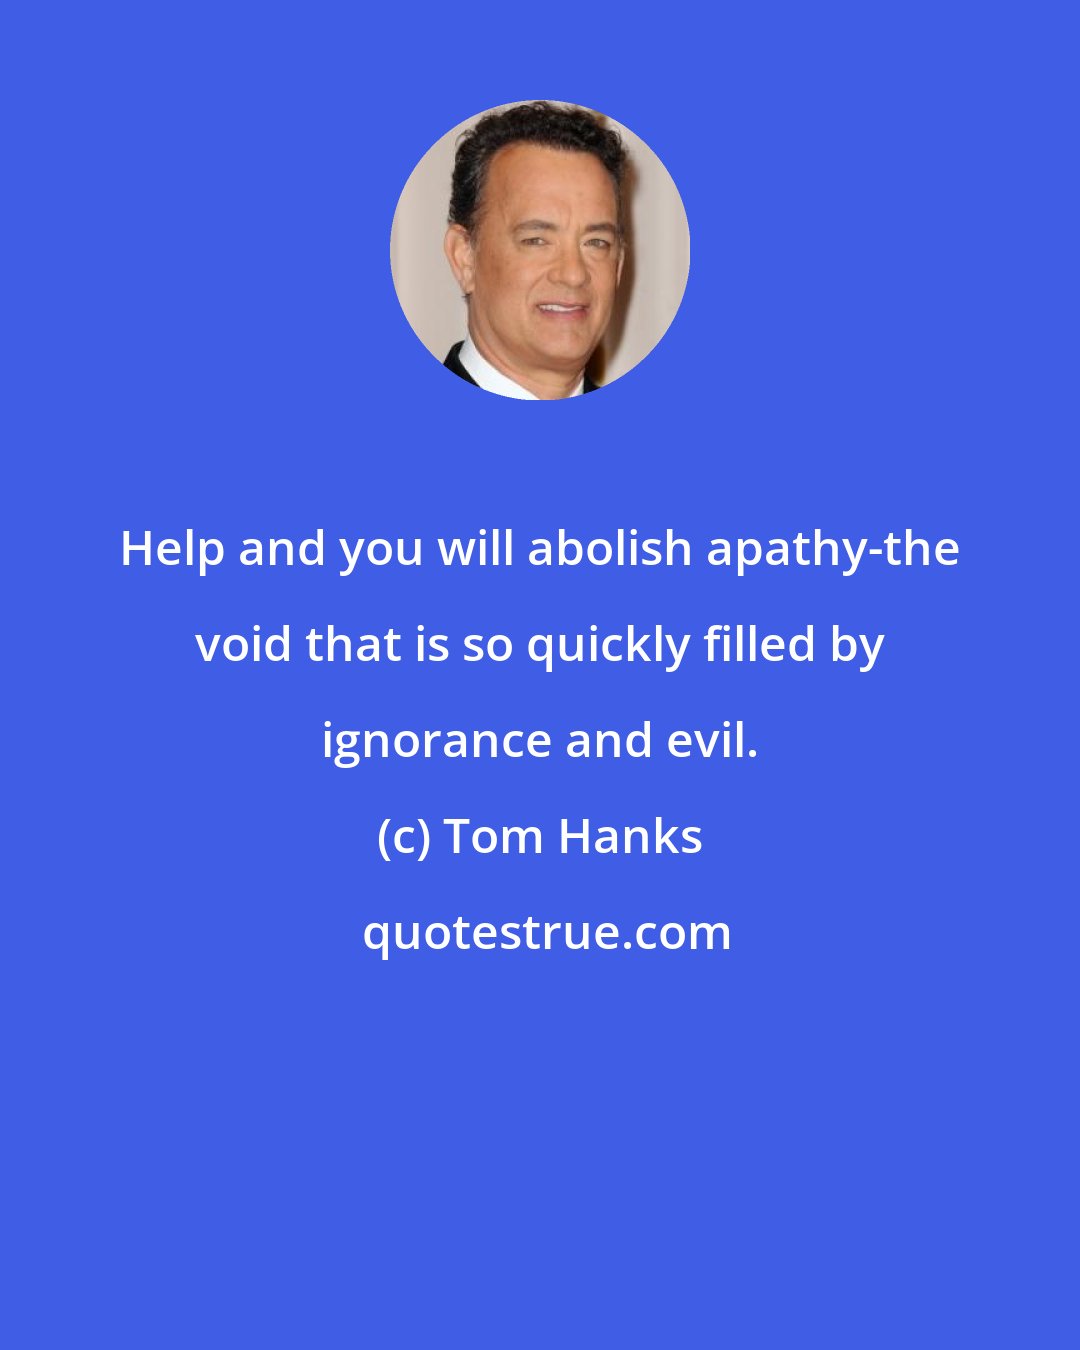 Tom Hanks: Help and you will abolish apathy-the void that is so quickly filled by ignorance and evil.